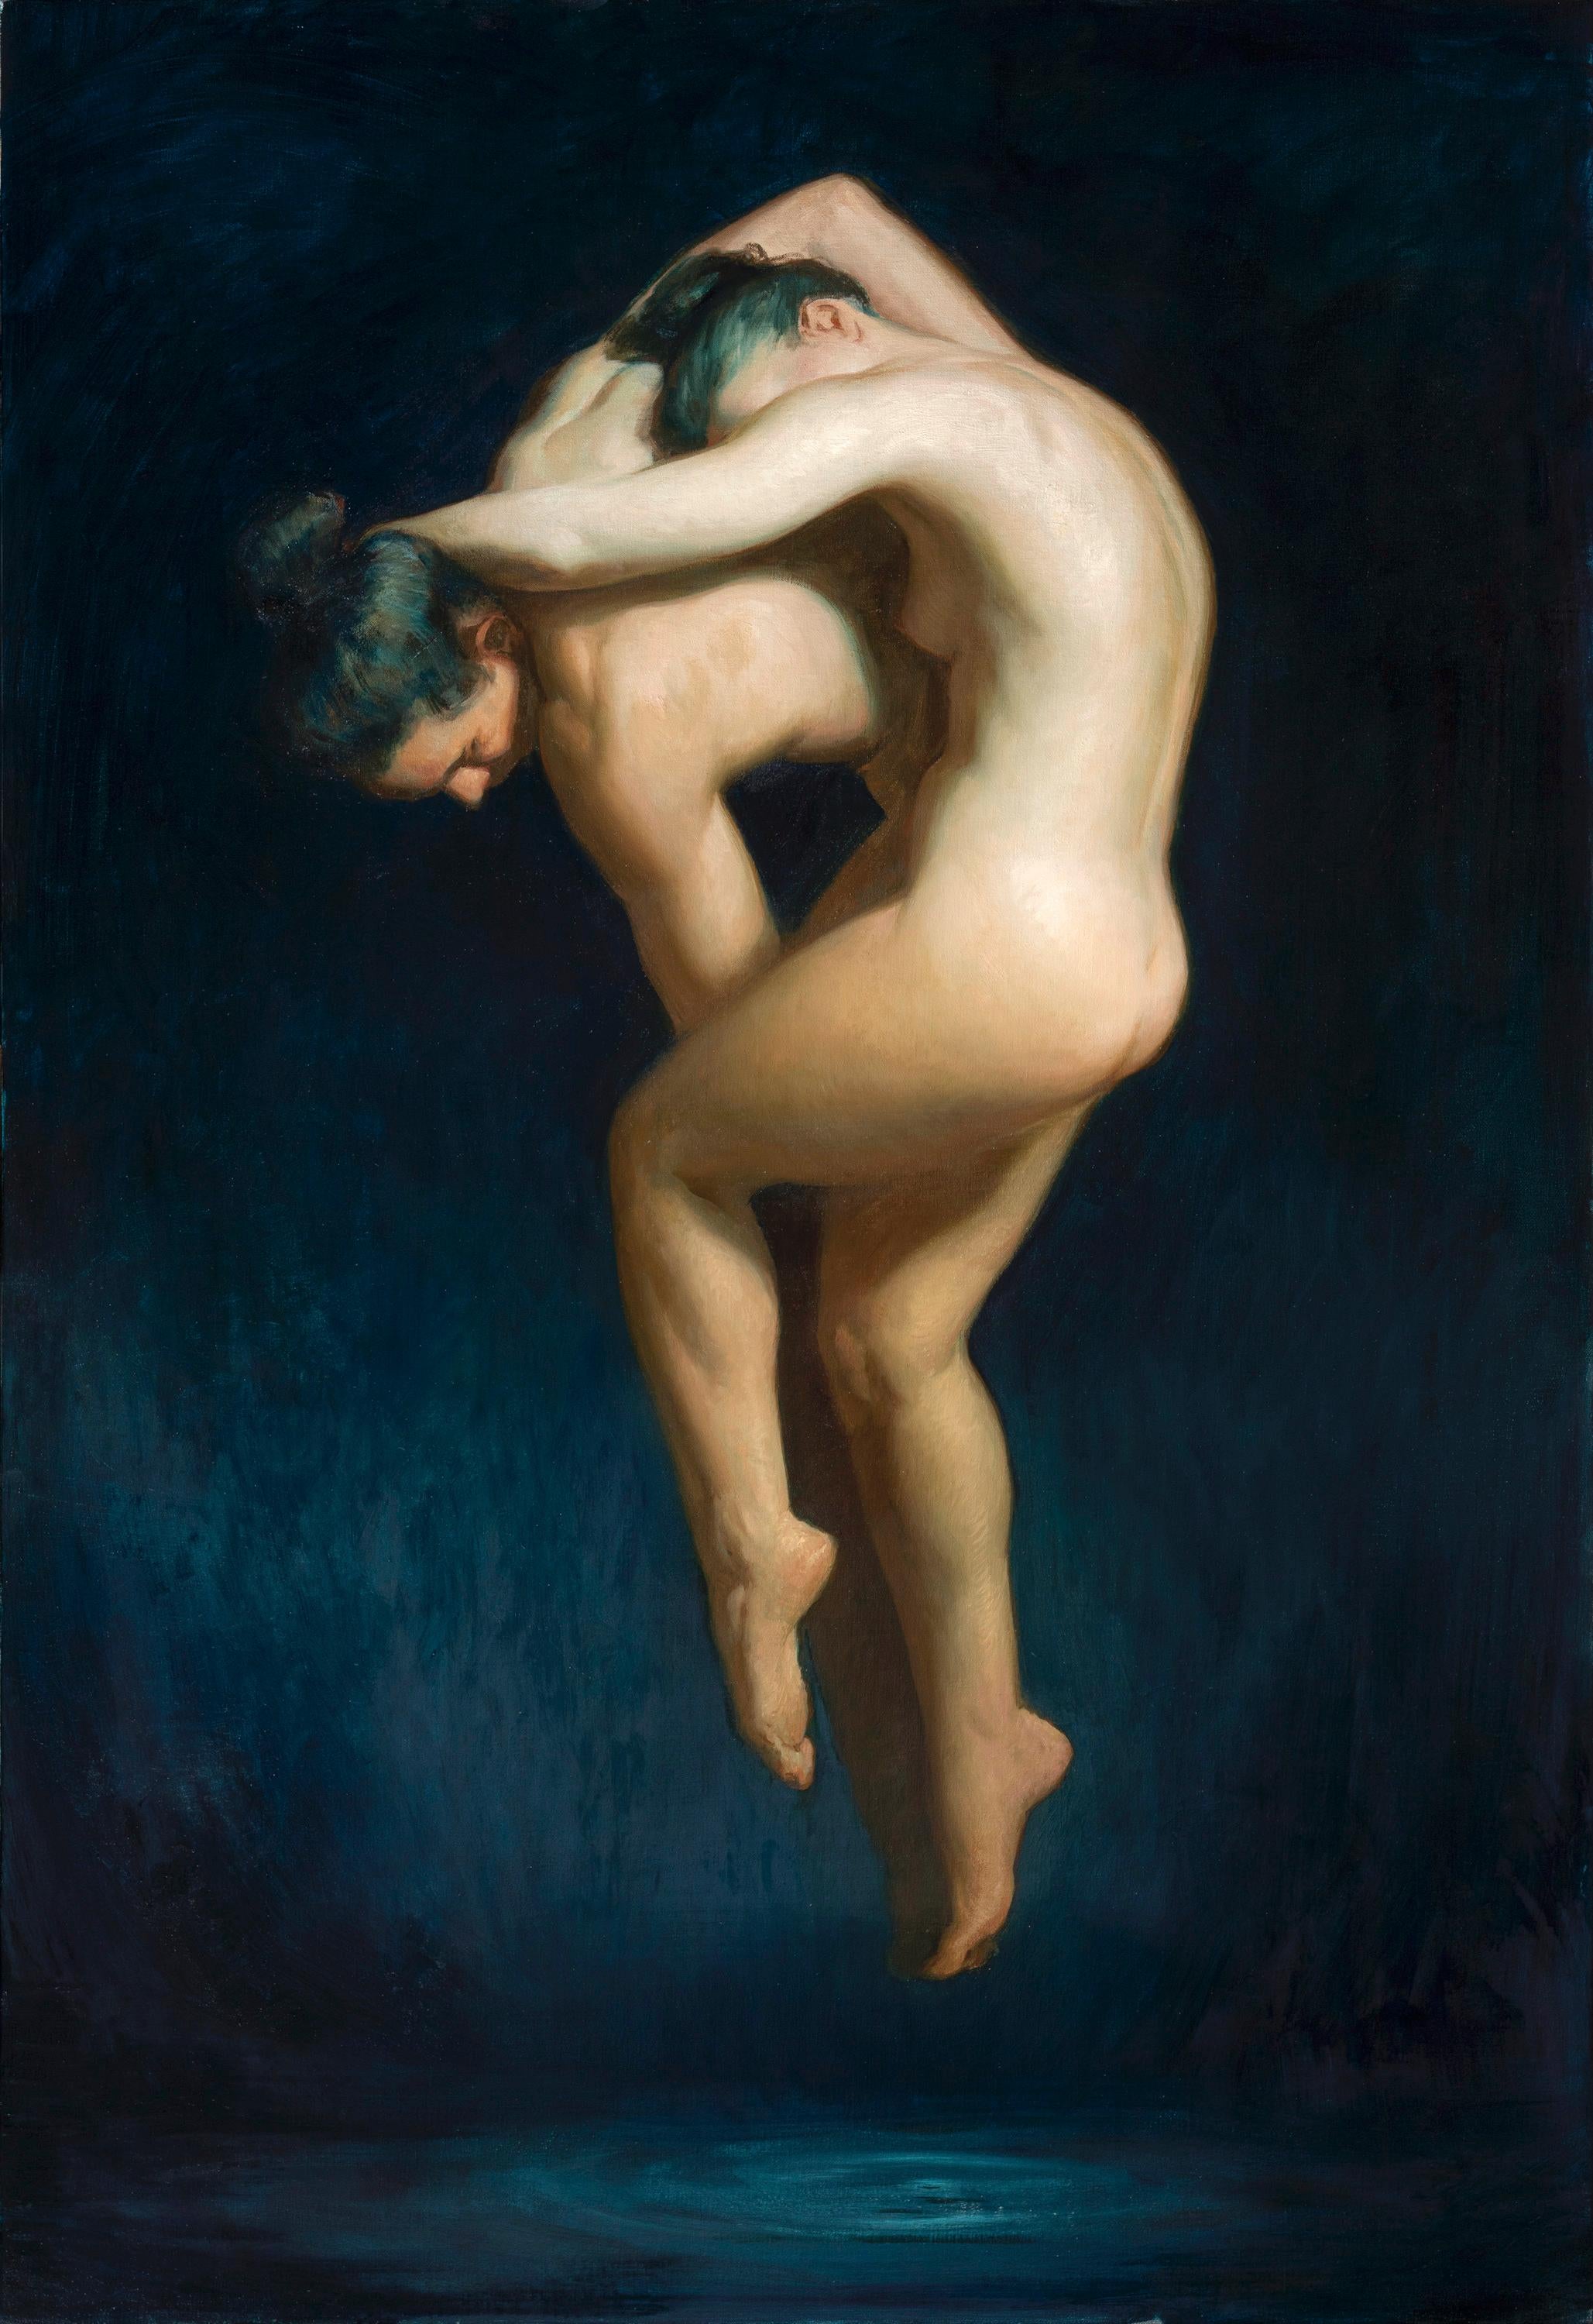 Daniela Astone Nude Painting - "Dancing Love" contemporary ethereal nude figures in green and blue water 